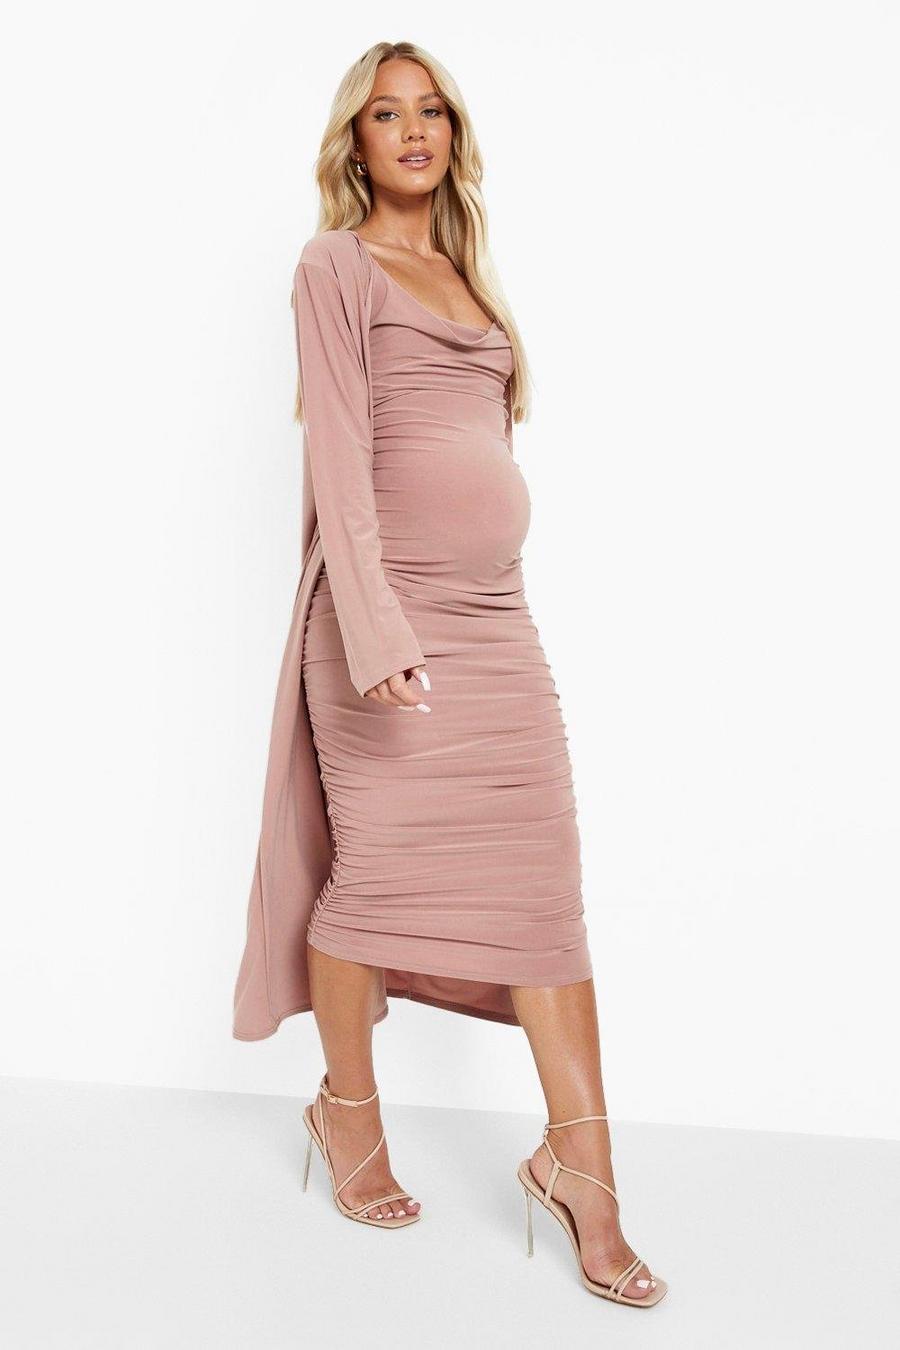 Rose Maternity Strappy Cowl Neck Dress And Duster Coat